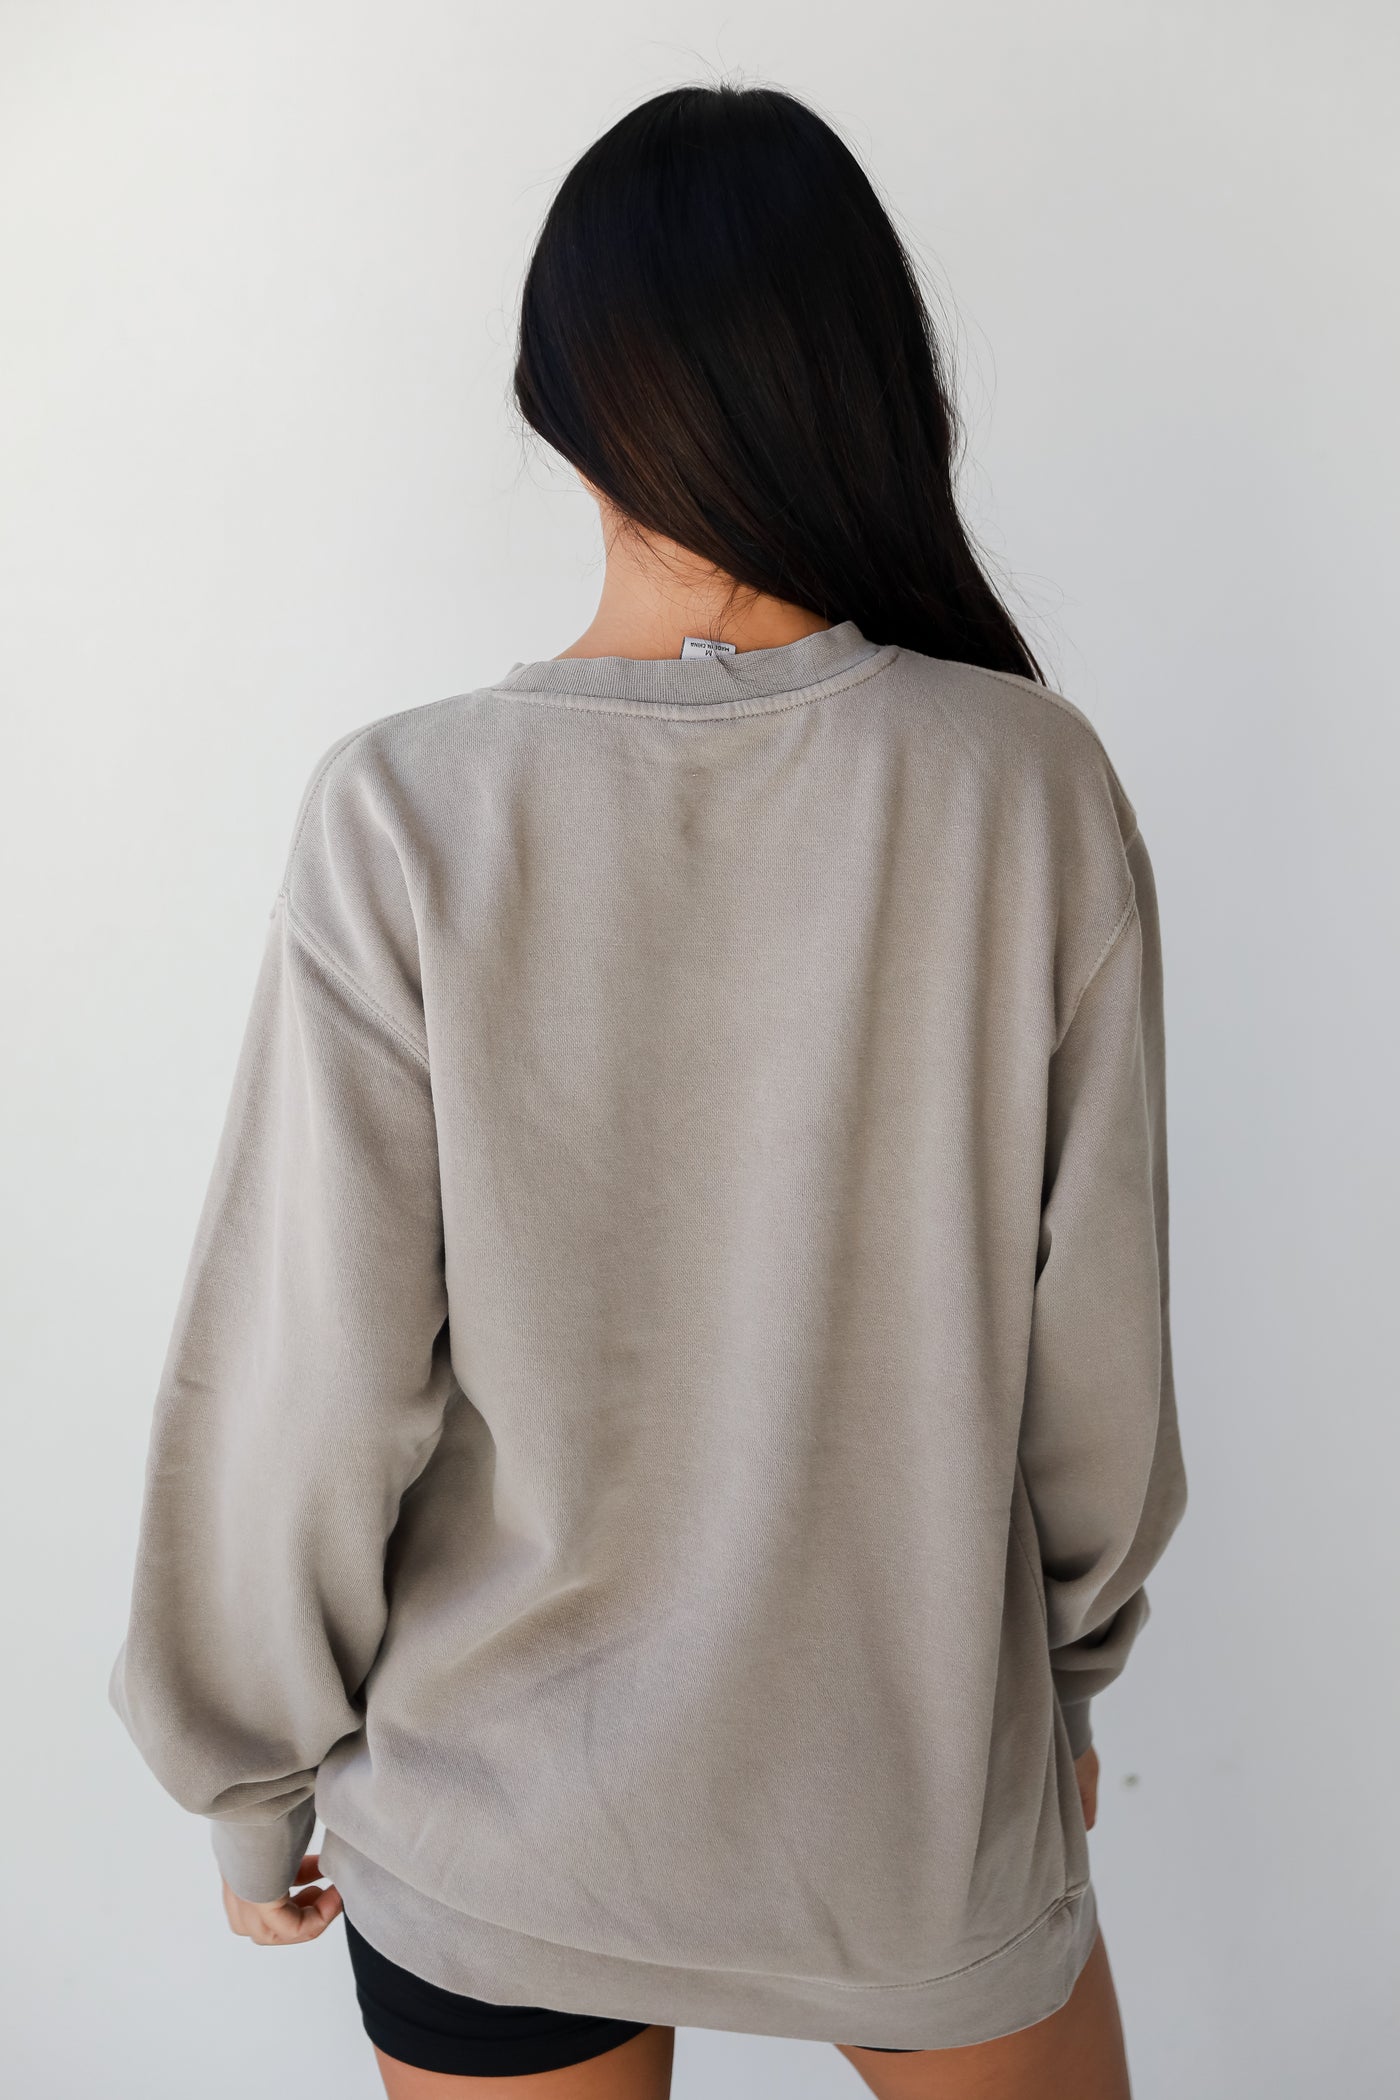 grey Athens Georgia Pullover back view